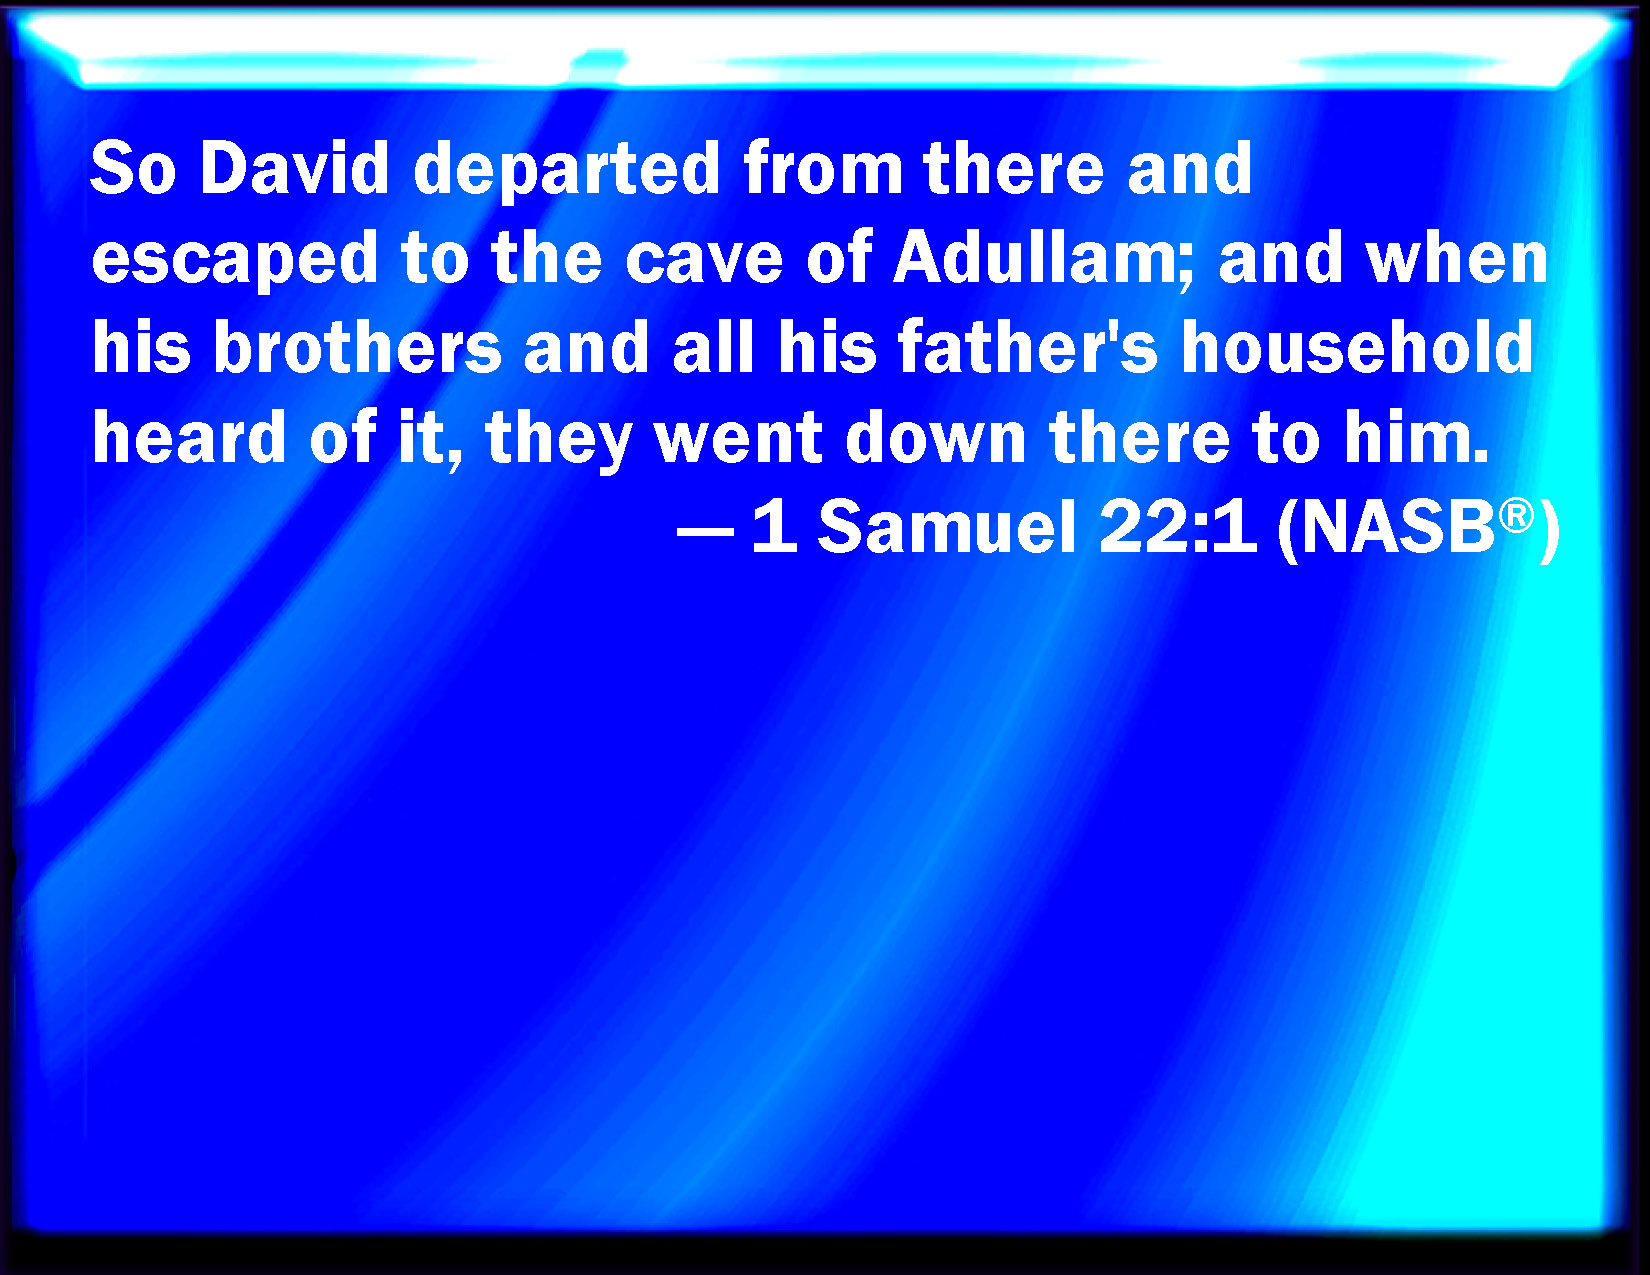 1 Samuel 221 David therefore departed there, and escaped